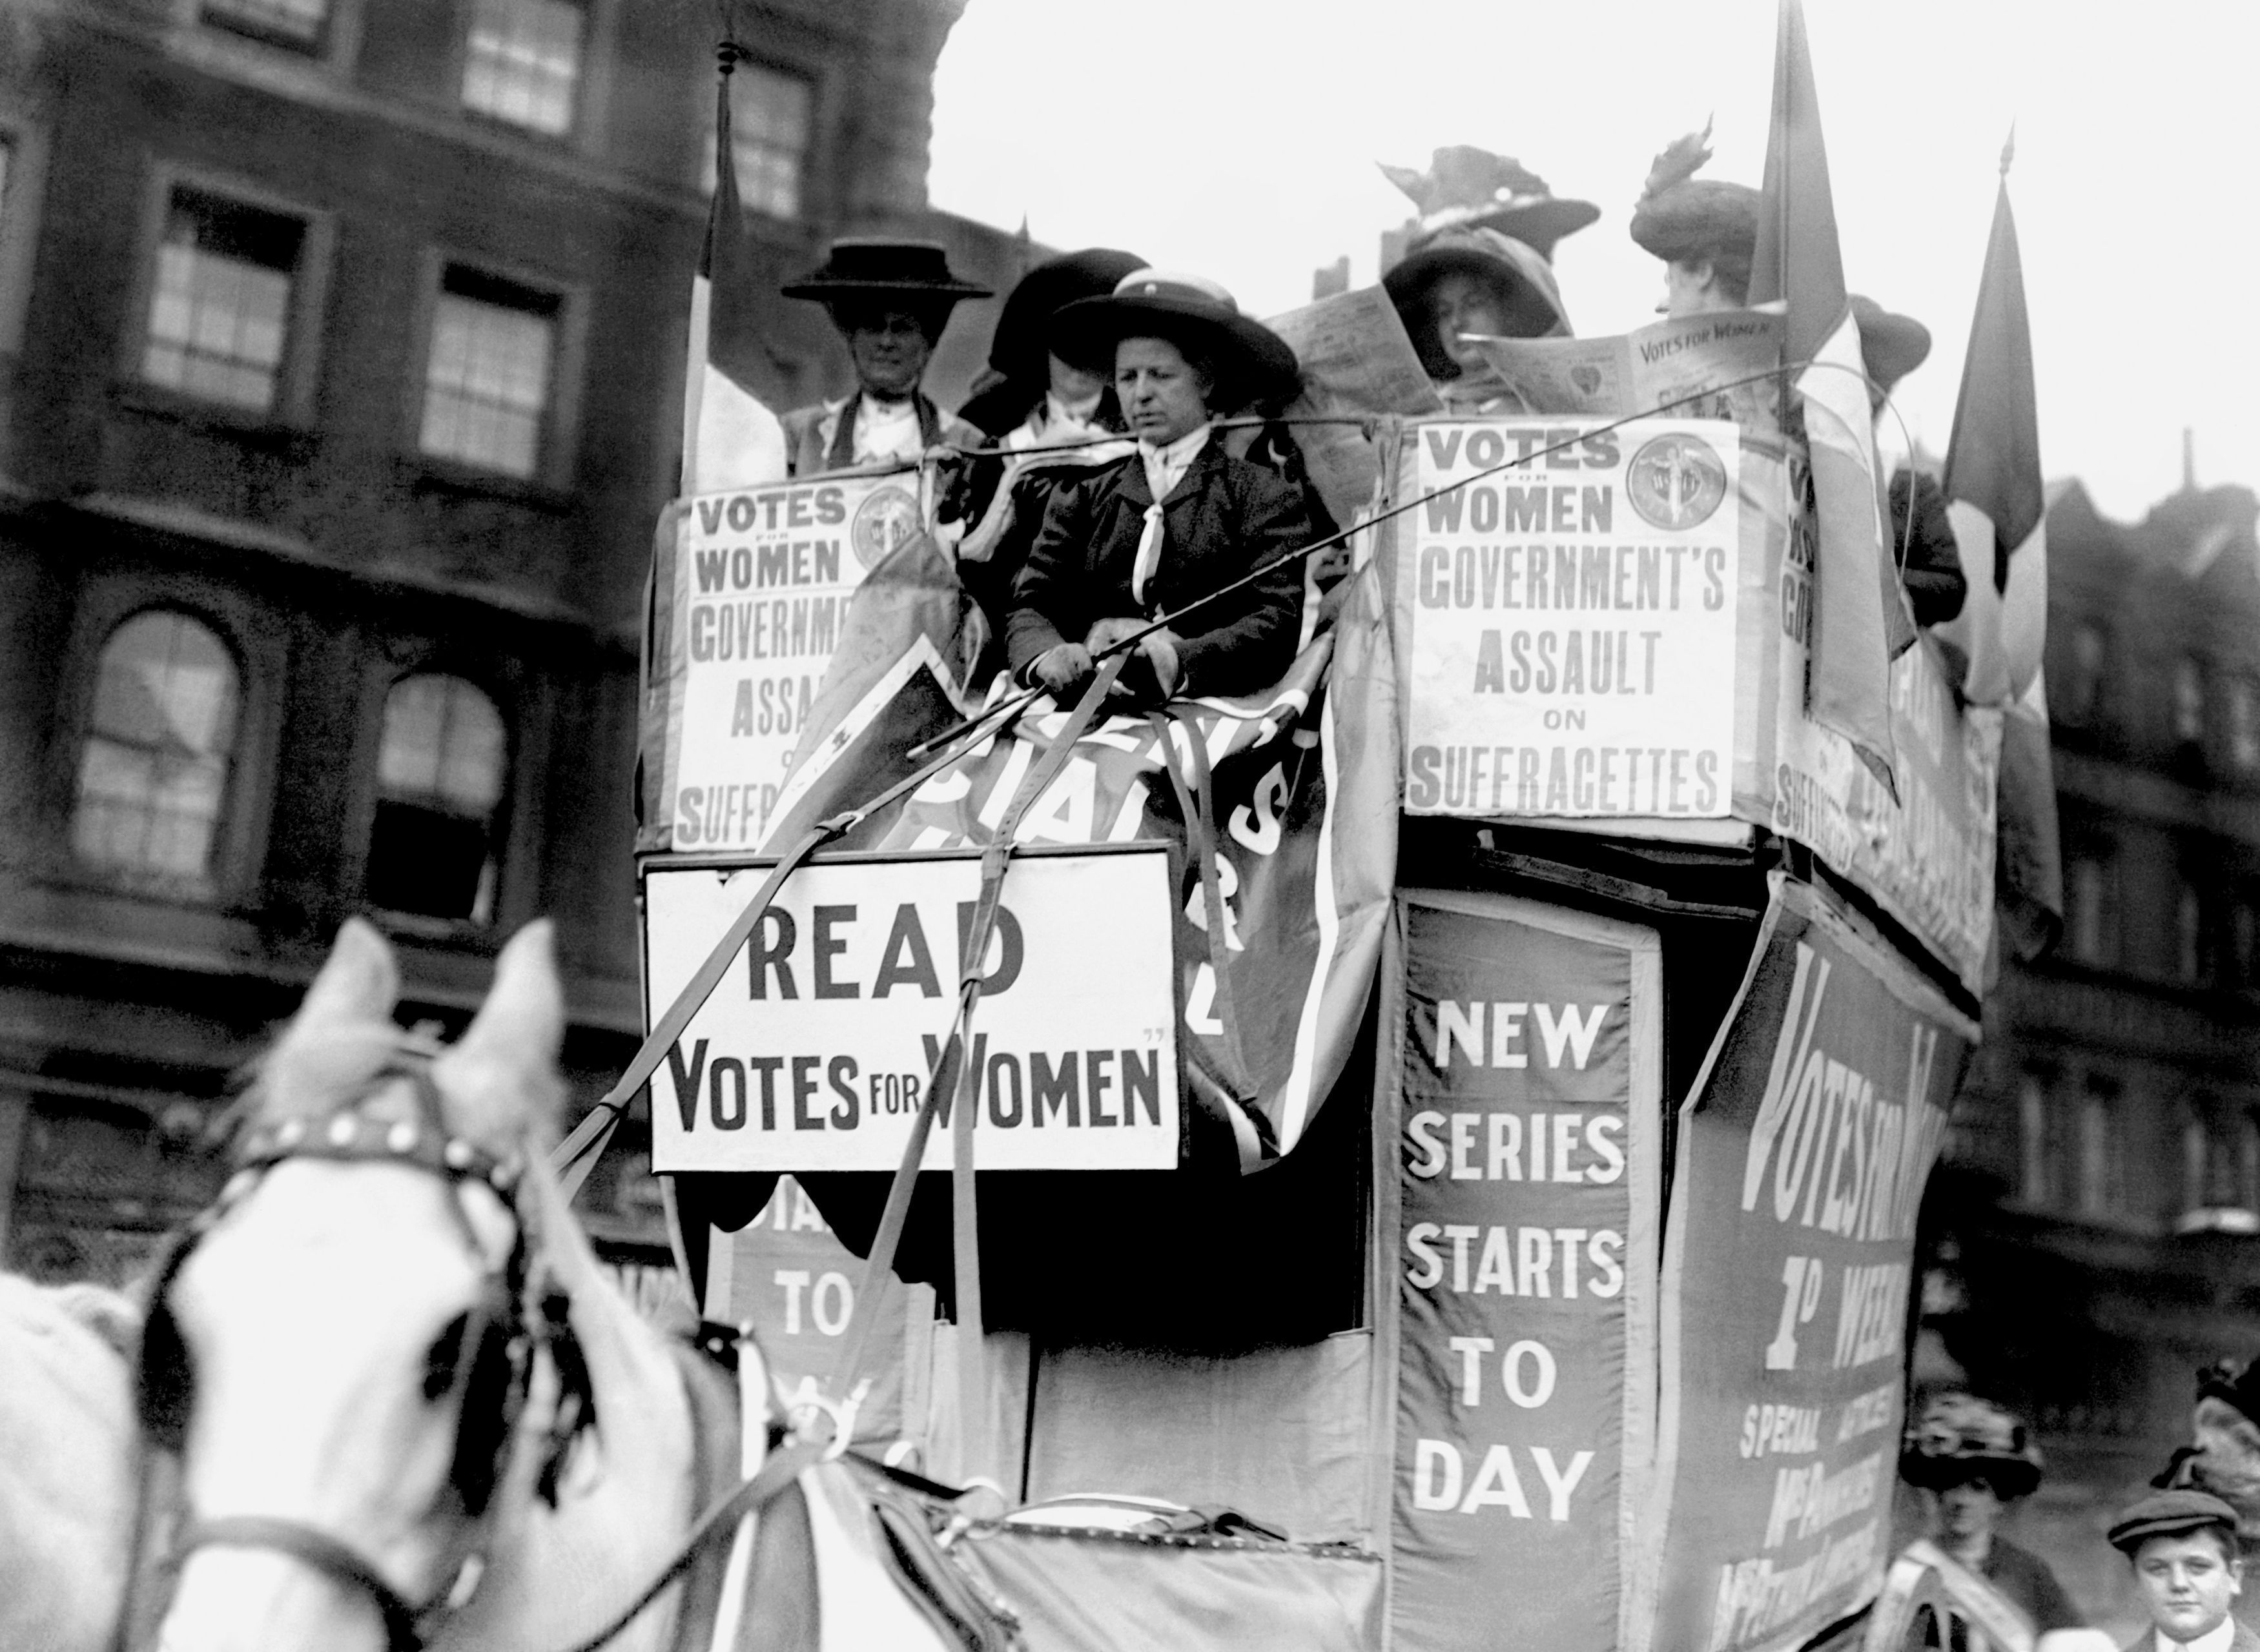 Members of the Women's Social and Political Union (WSPU) on a horse-drawn carriage driven by Emmeline Pankhurst in 1910 (PA)